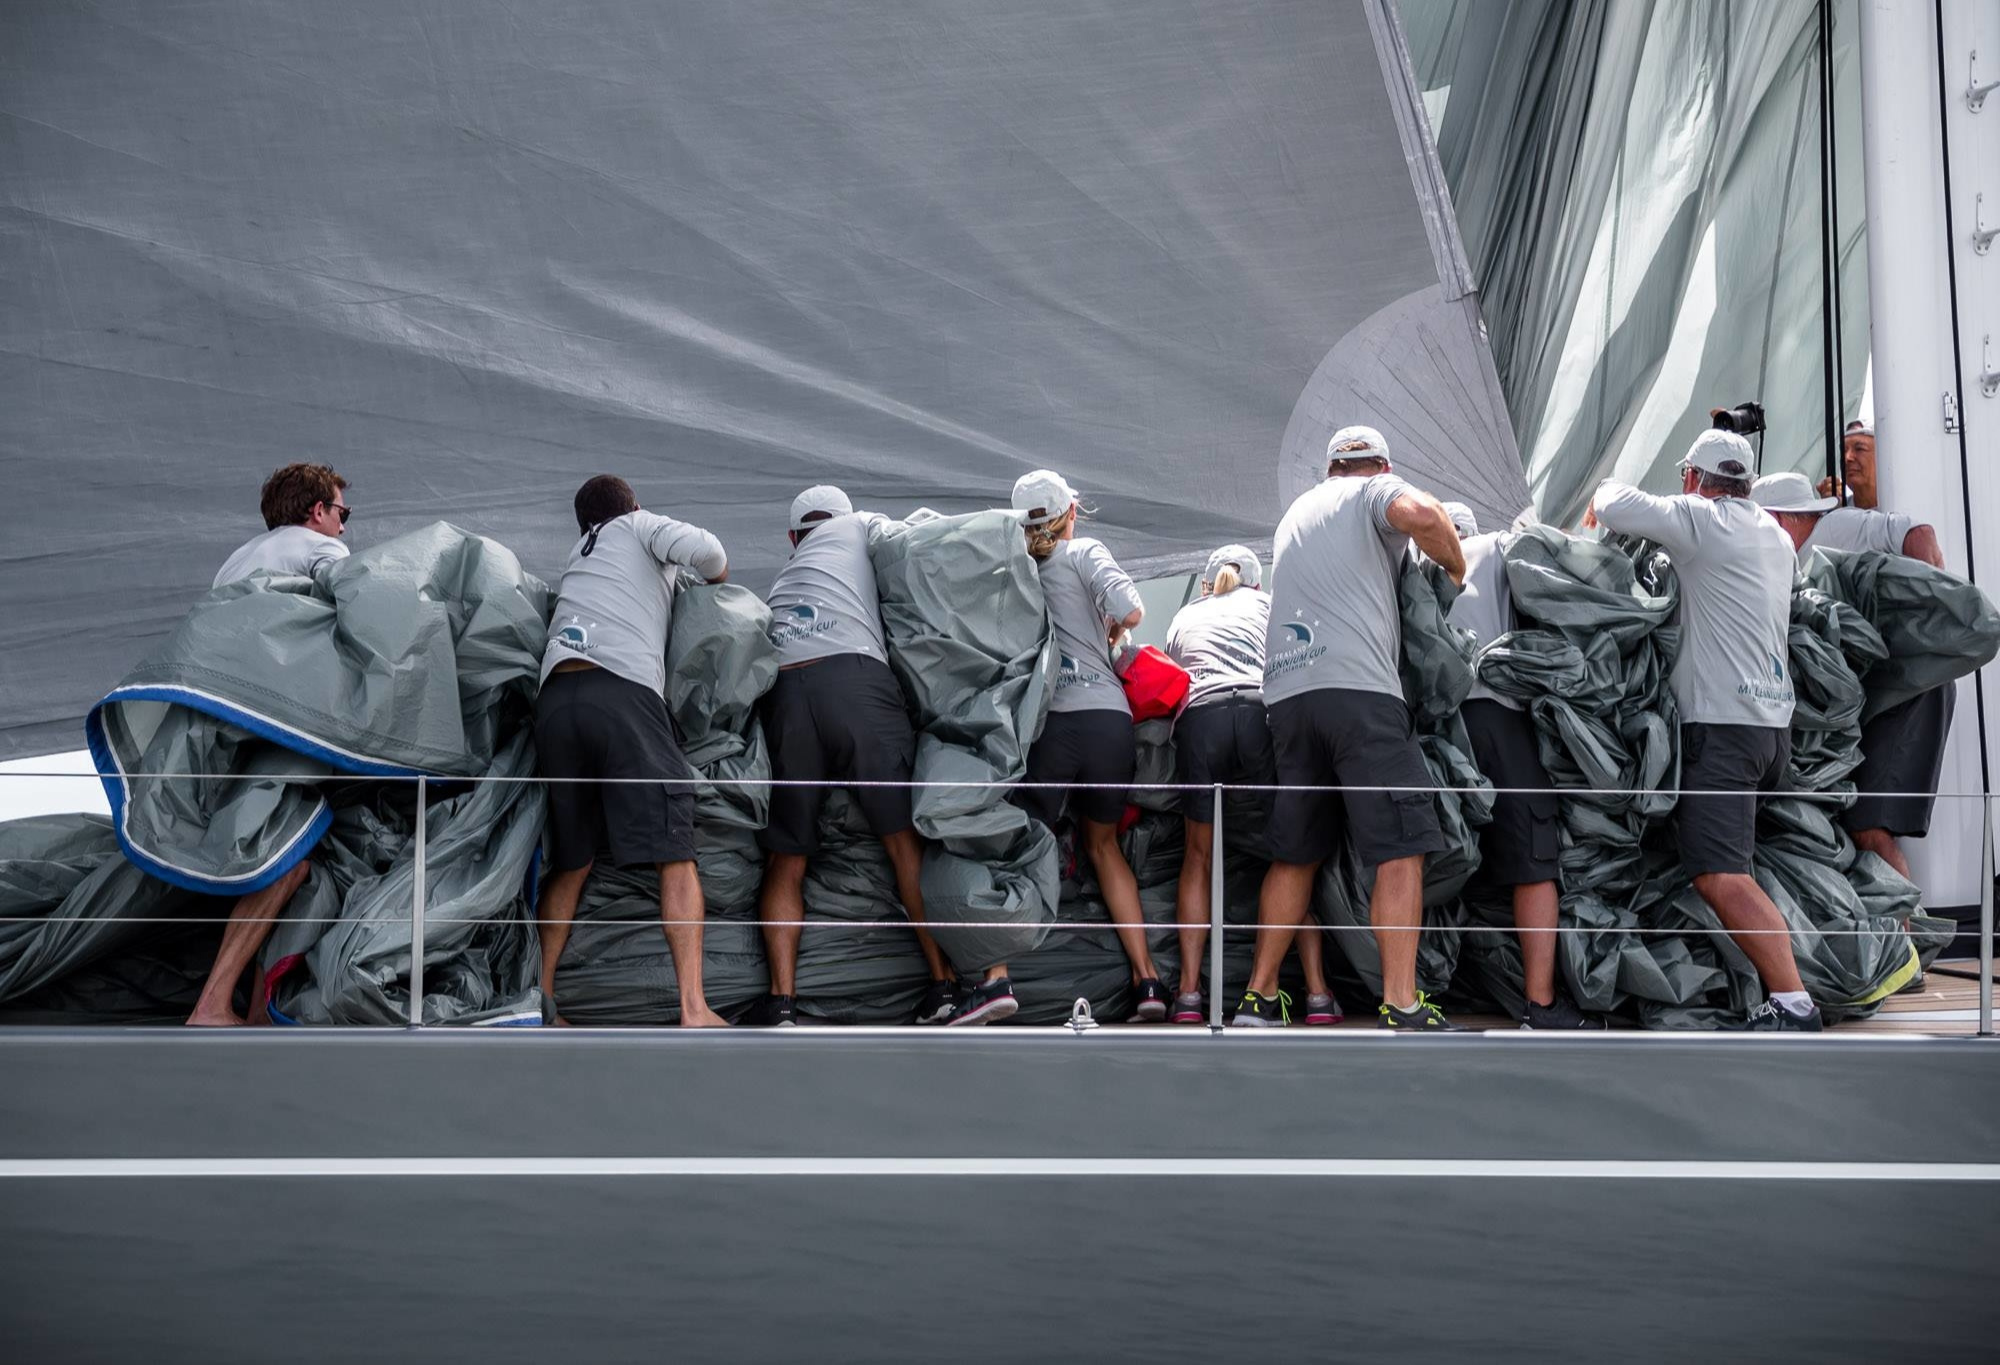 When you need to take out or take out a spinnaker, every pair of hands is precious. At work, the photographer seems to have caught the Silvertip team.